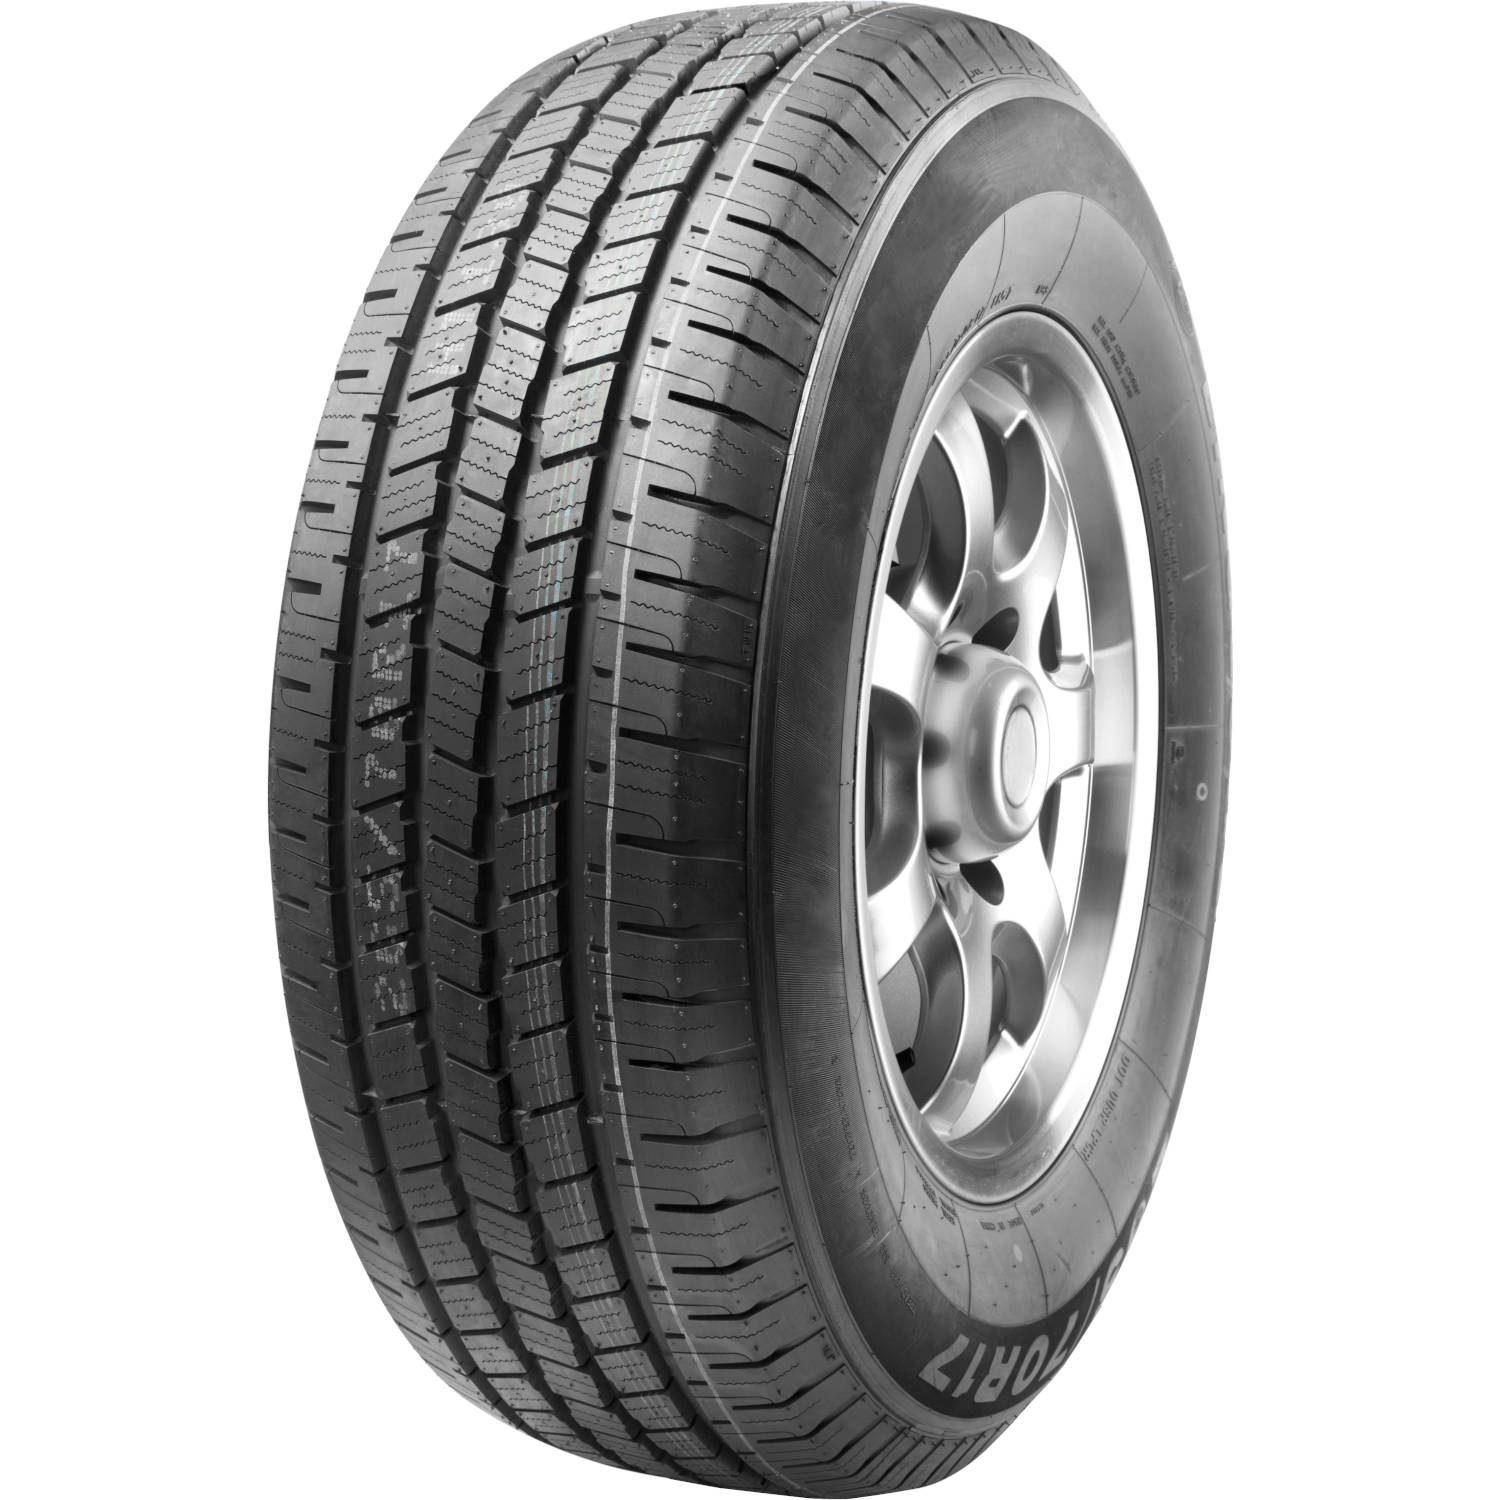 ROAD ONE CAVALRY H/T 265/65R17 (30.6X10.4R 17) Tires